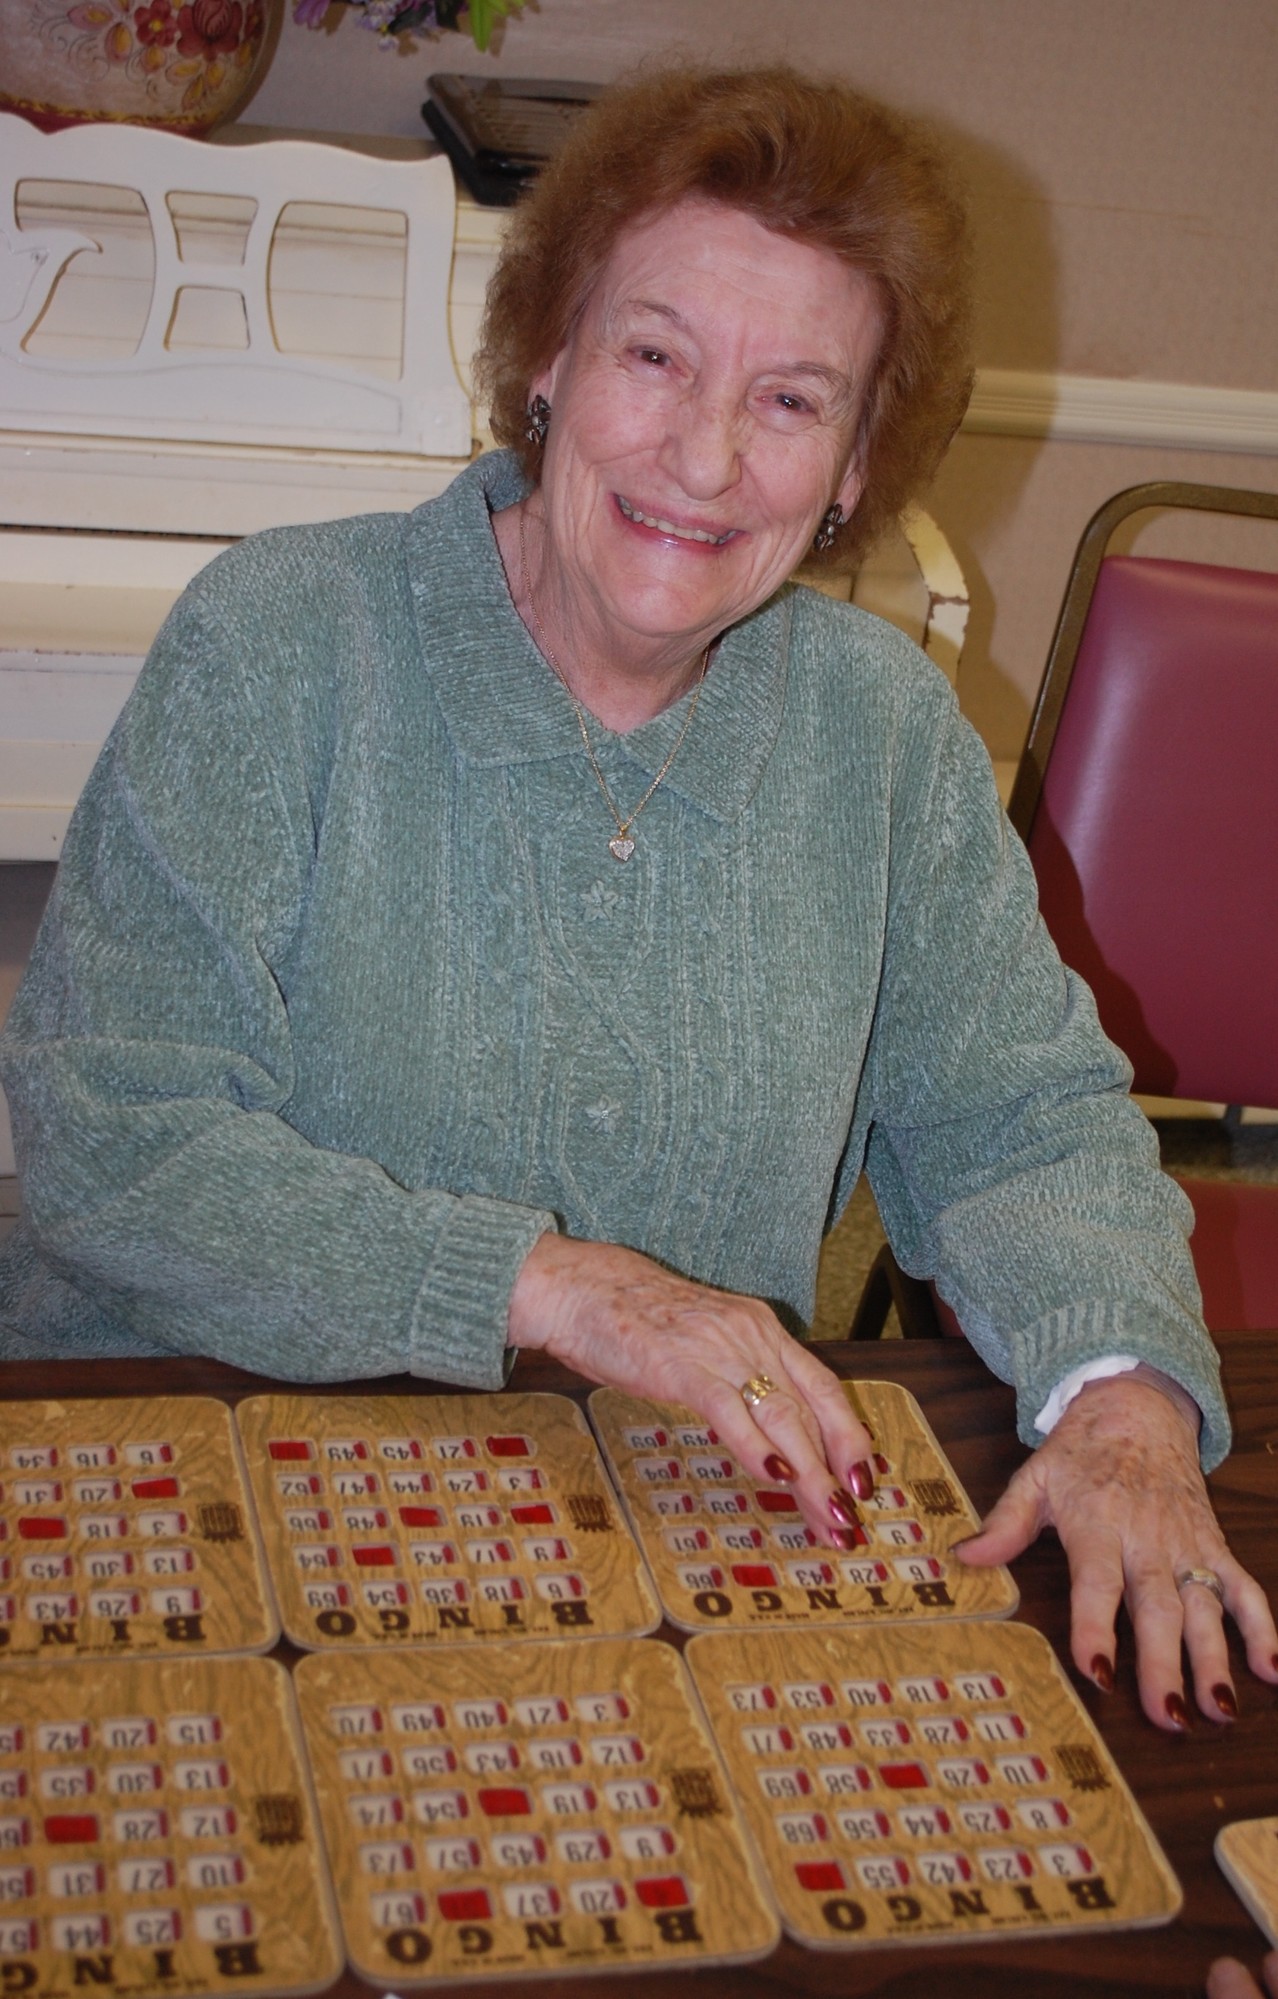 Meredith Schiraldo enjoys getting out of the house and playing bingo with her friends at the senior center.